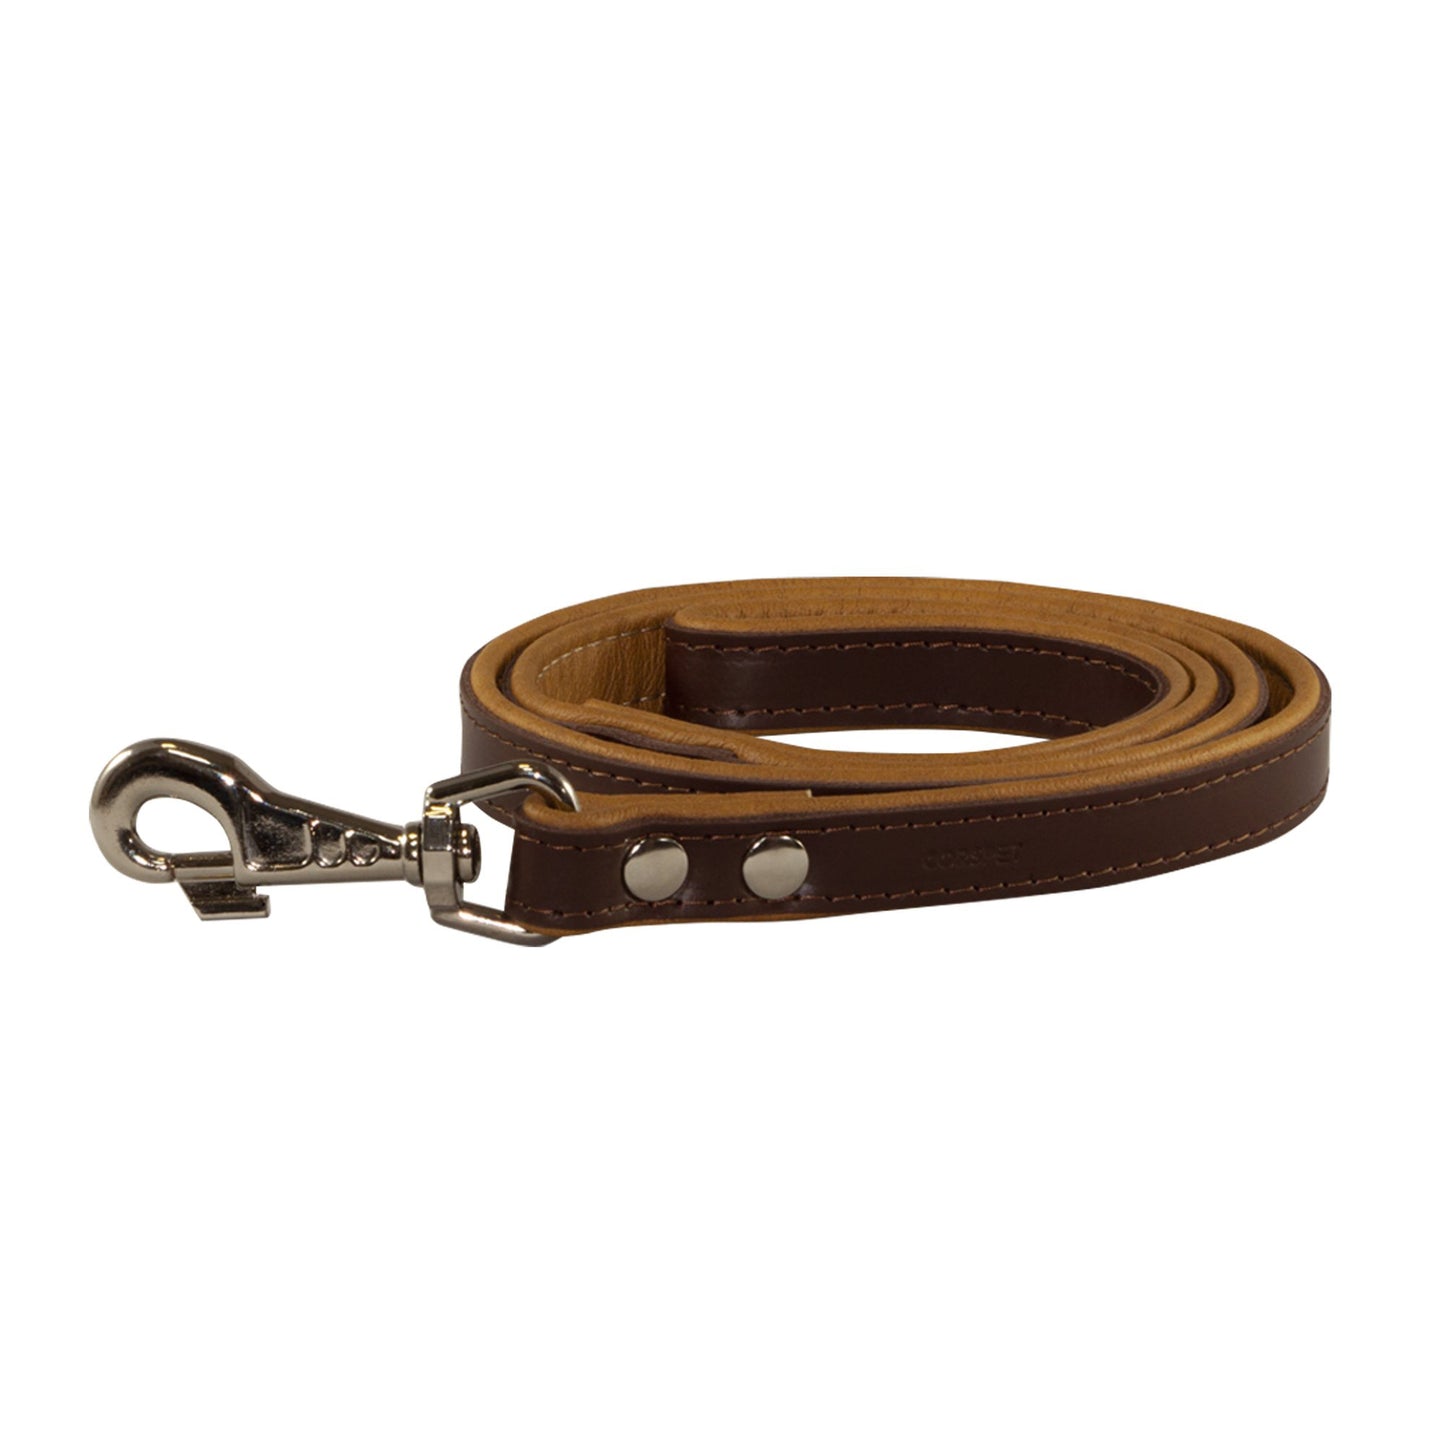 leather dog lead, best dog collar and leash sets, brown leash